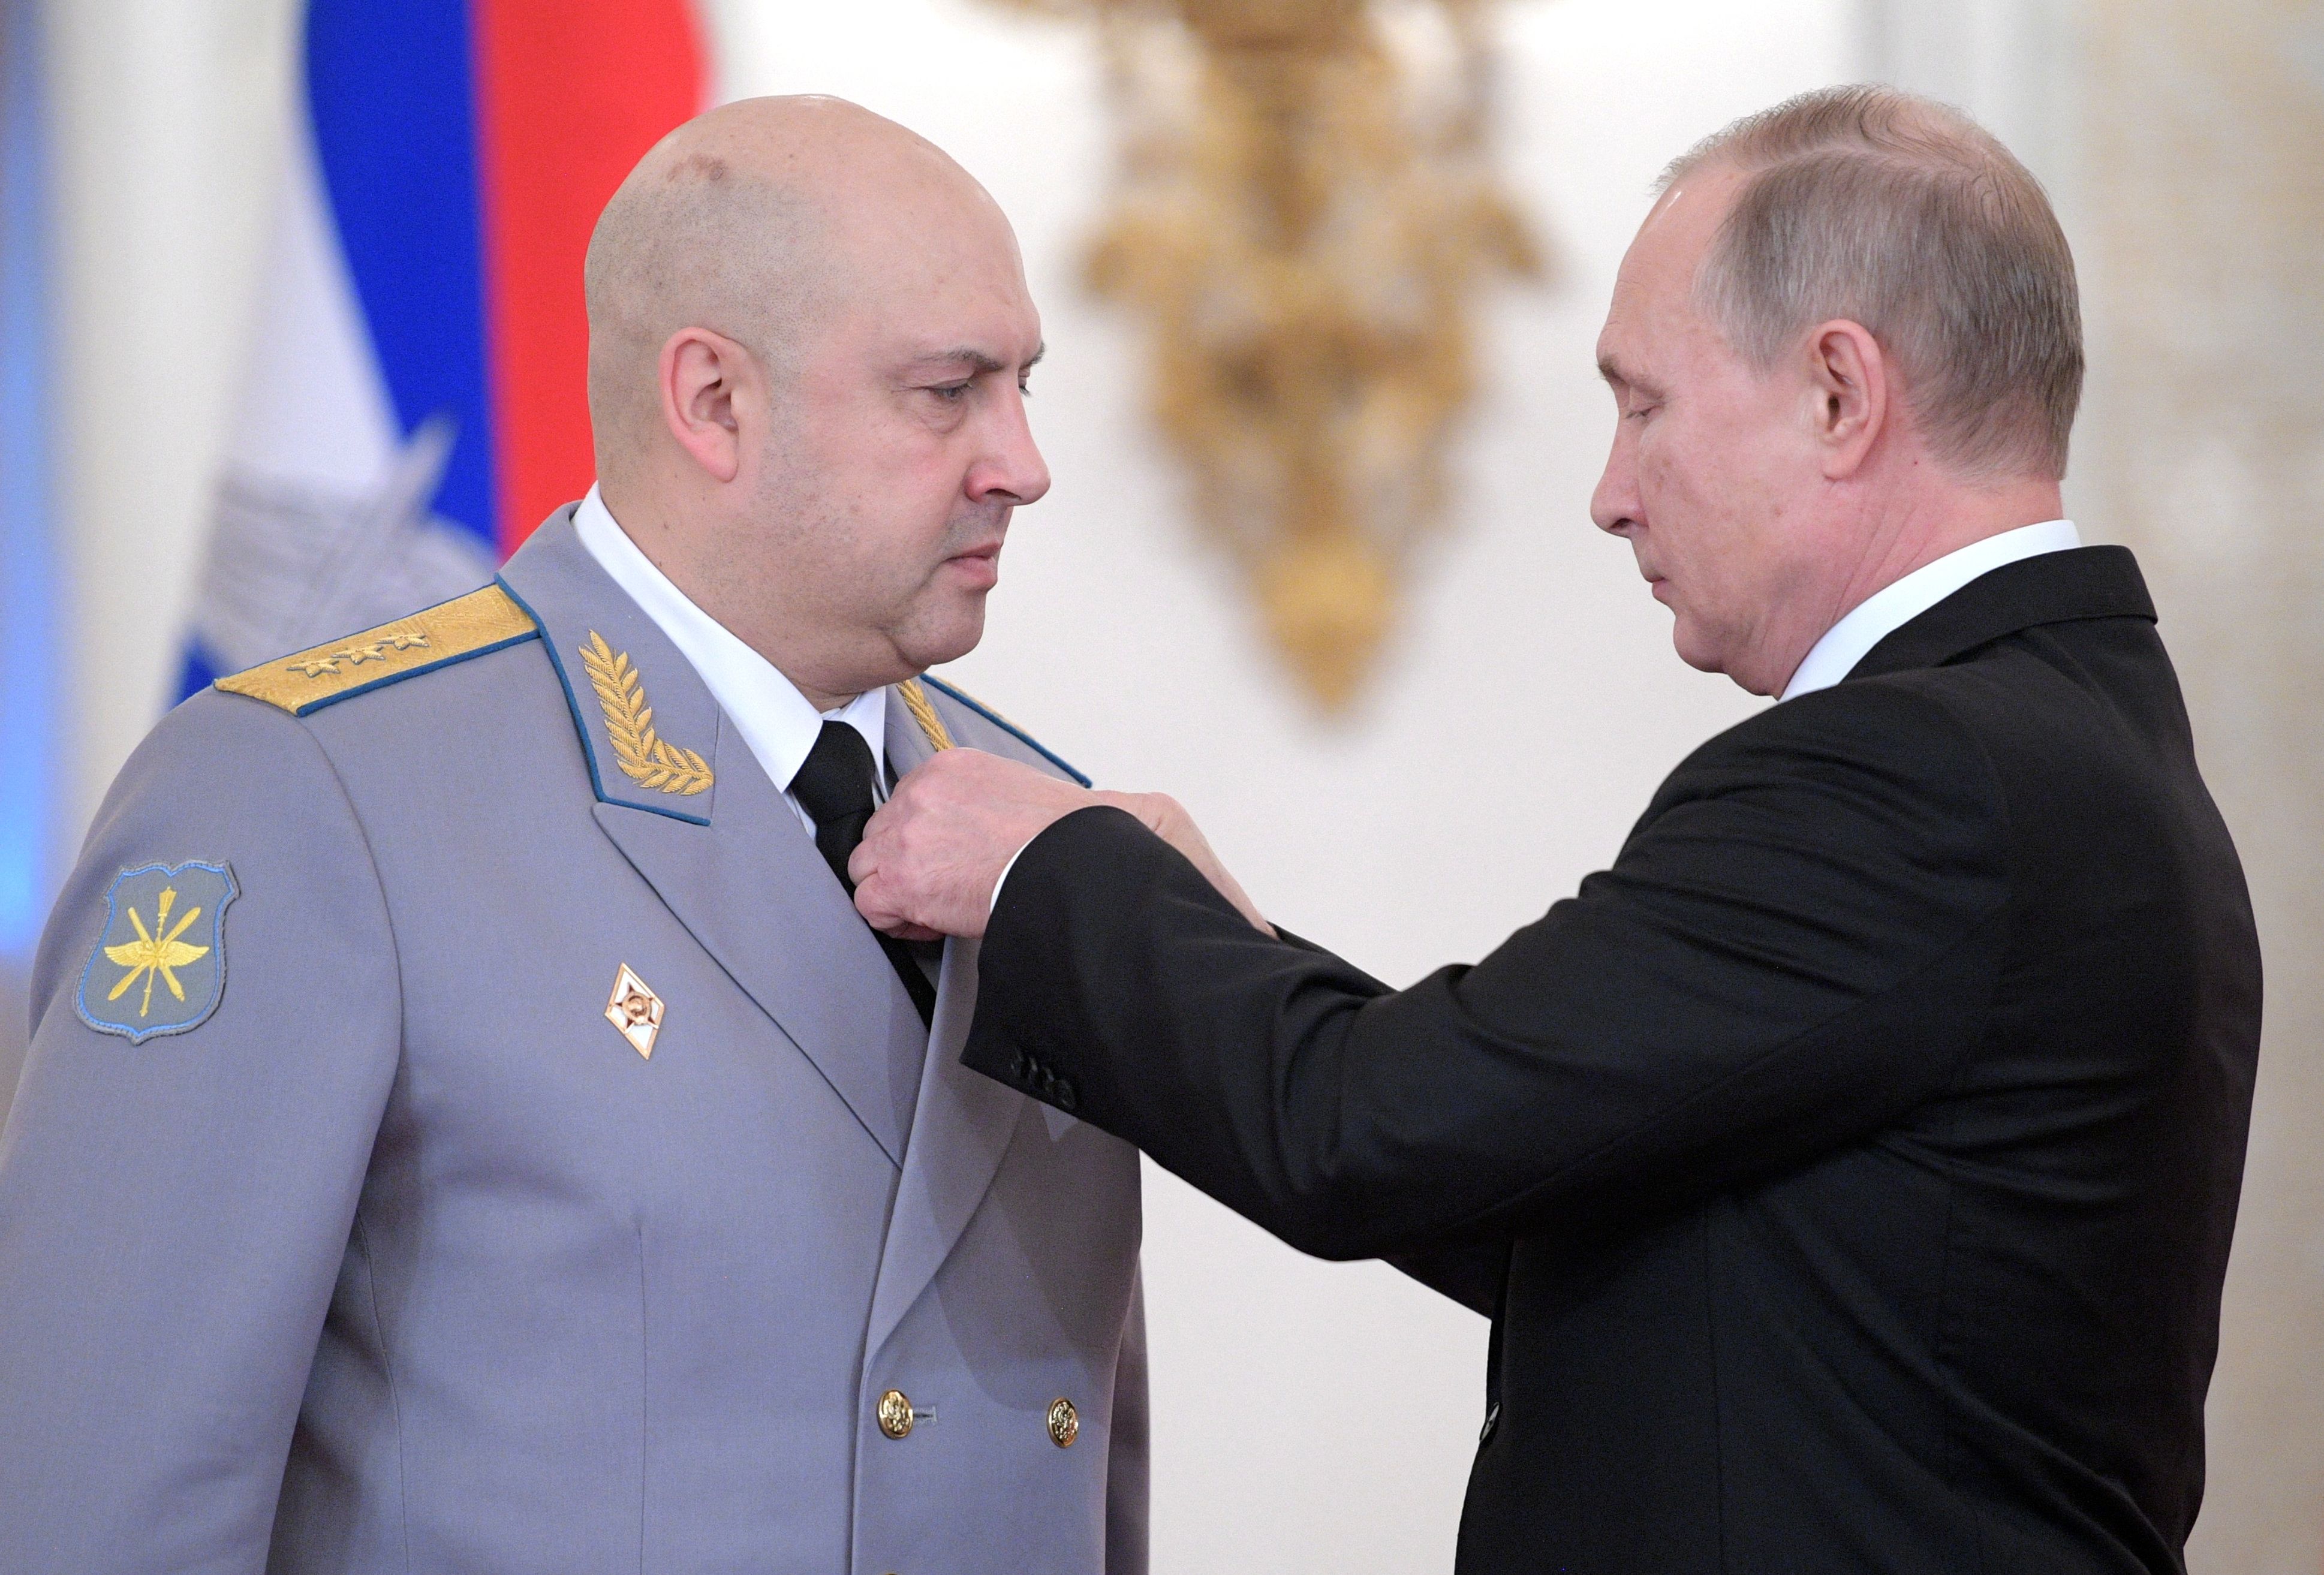 Russia Top General's Name Disappears From Military Leadership Page